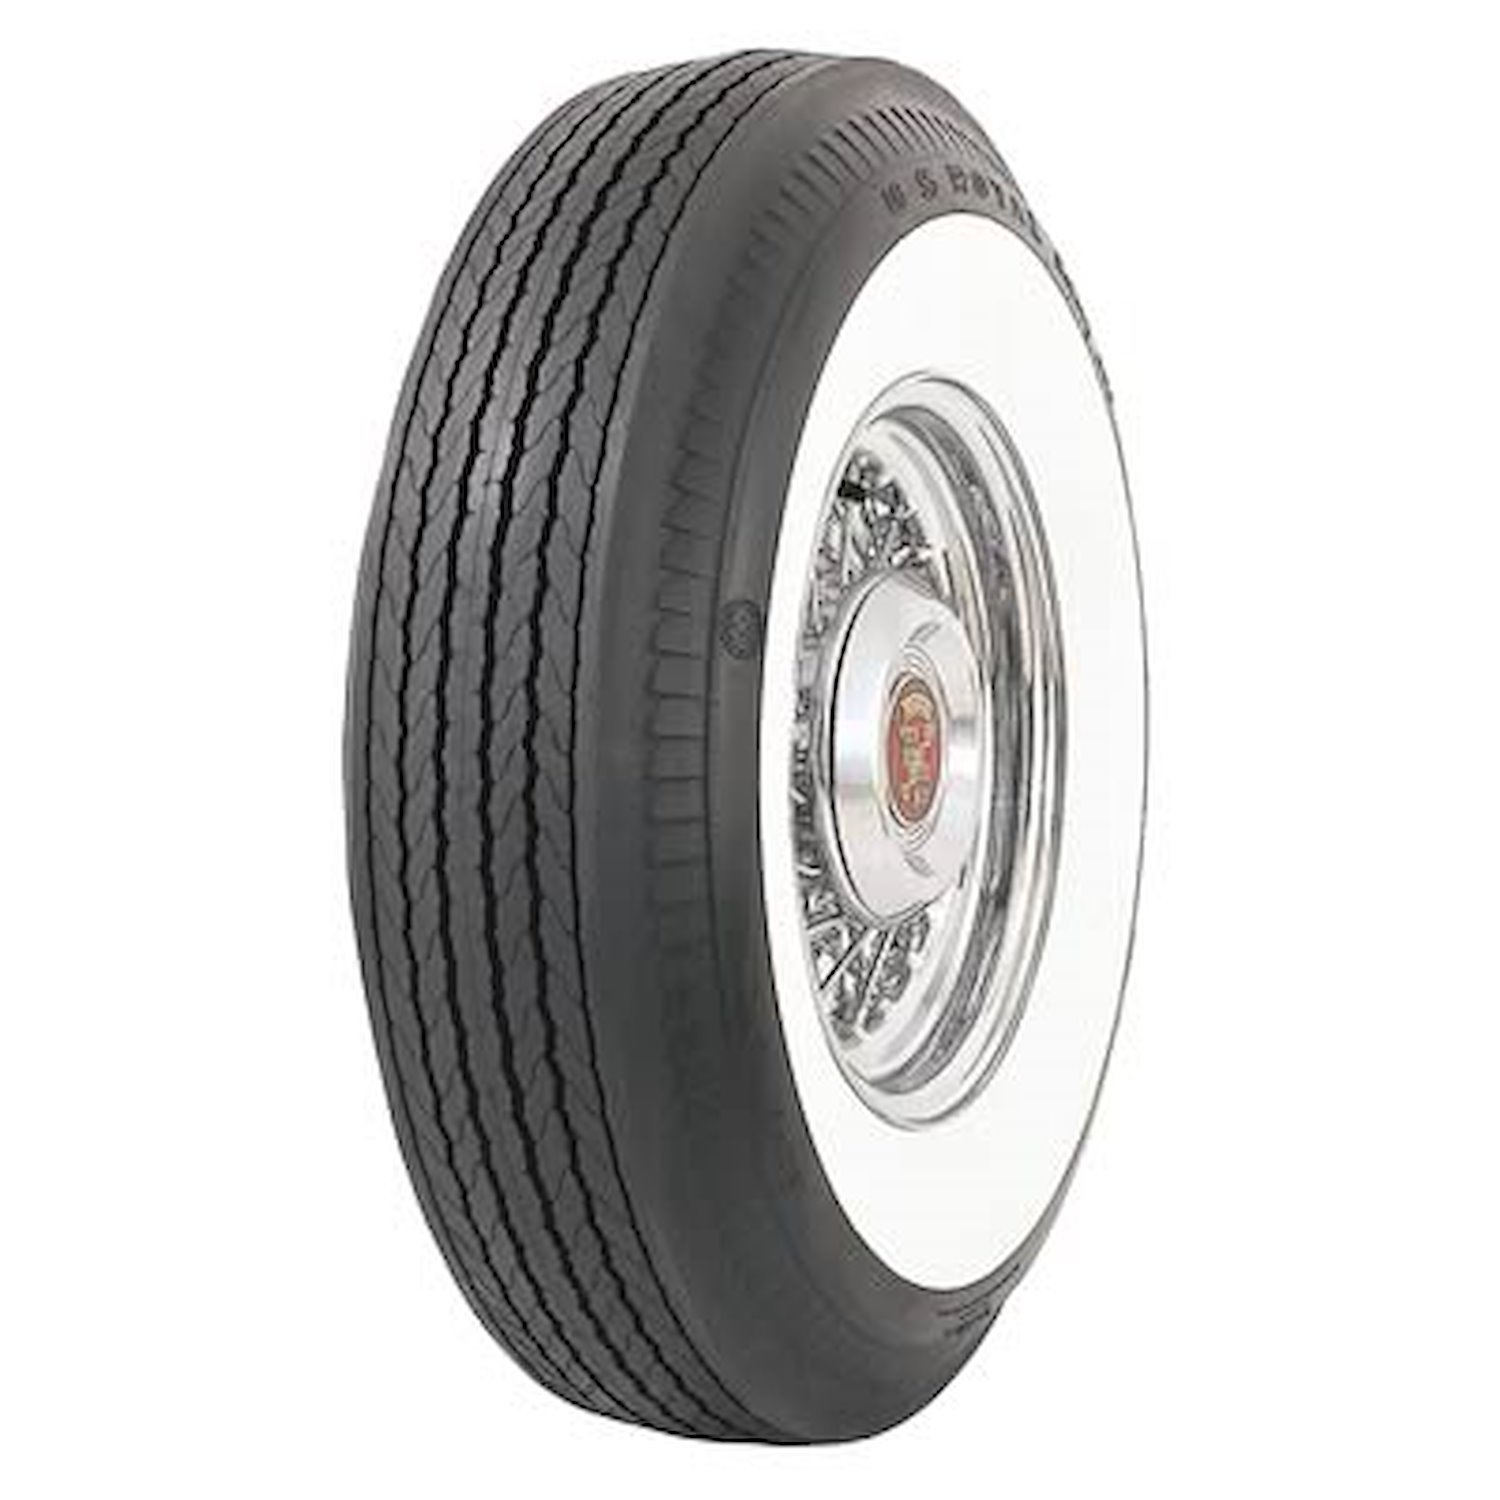 619903 Tire, US Royal Safety 800 1.00-Inch Whitewall, 820-15